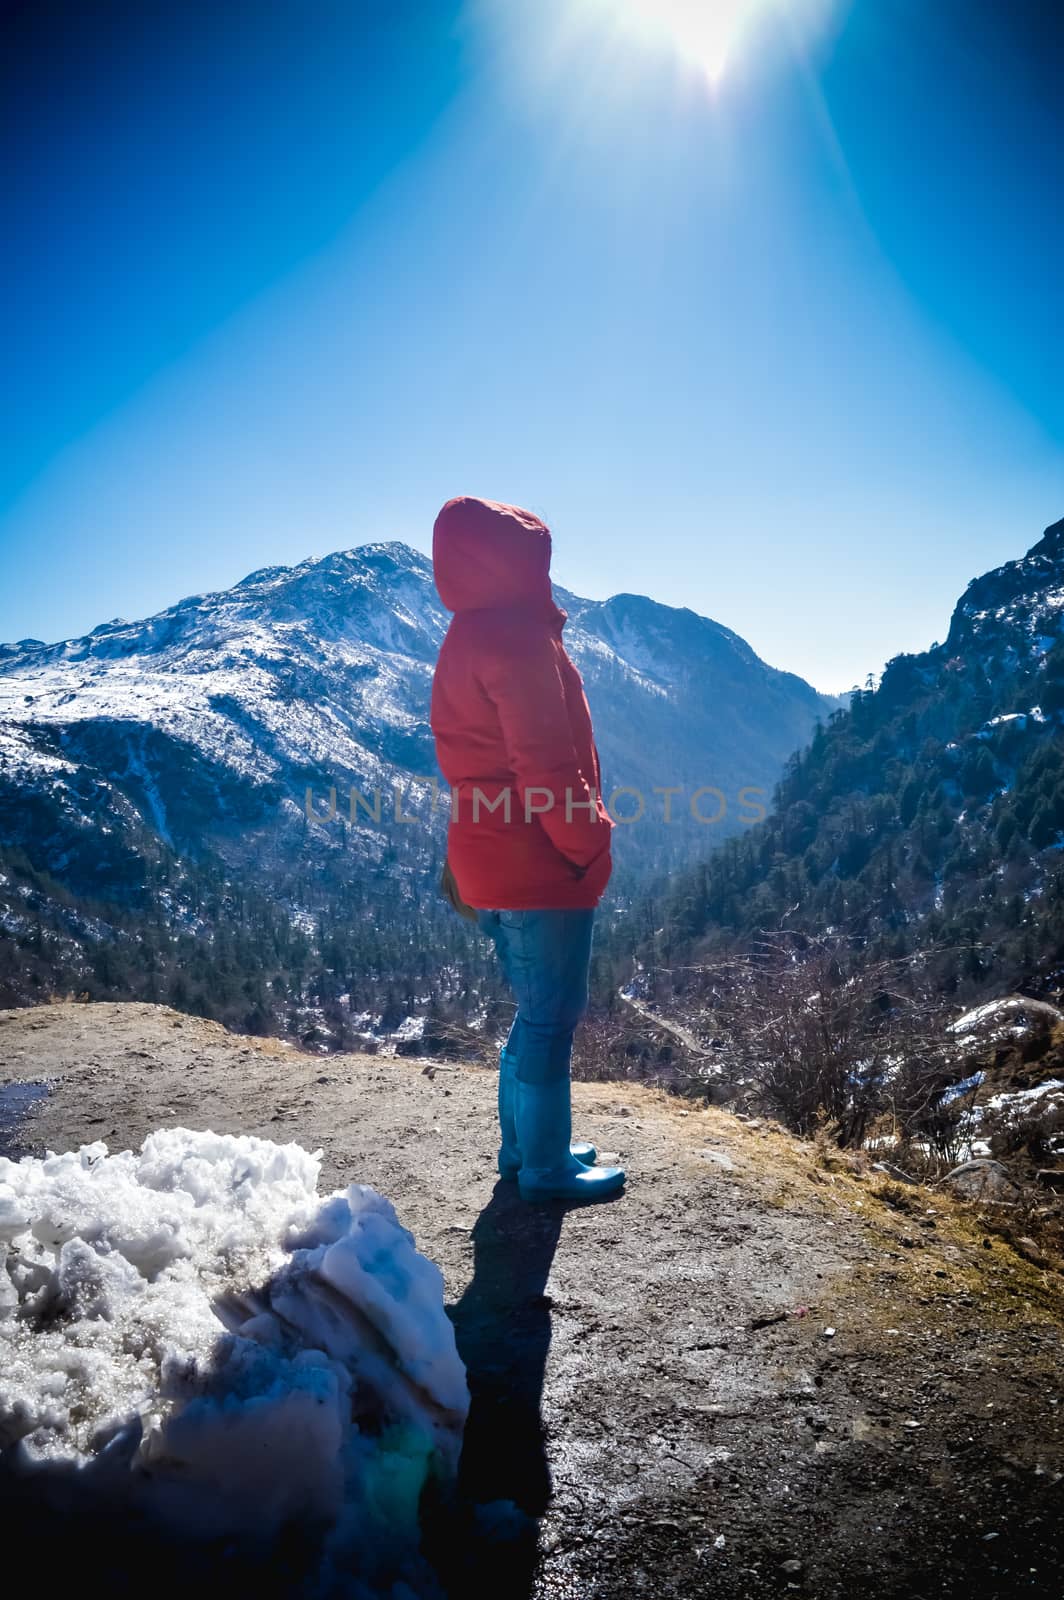 A woman in winter clothing standing on top of the rock of a snowcapped rocky mountain. Rear view. Deep Snow and Blizzard all around. Human face to face with beauty in nature concept. by sudiptabhowmick